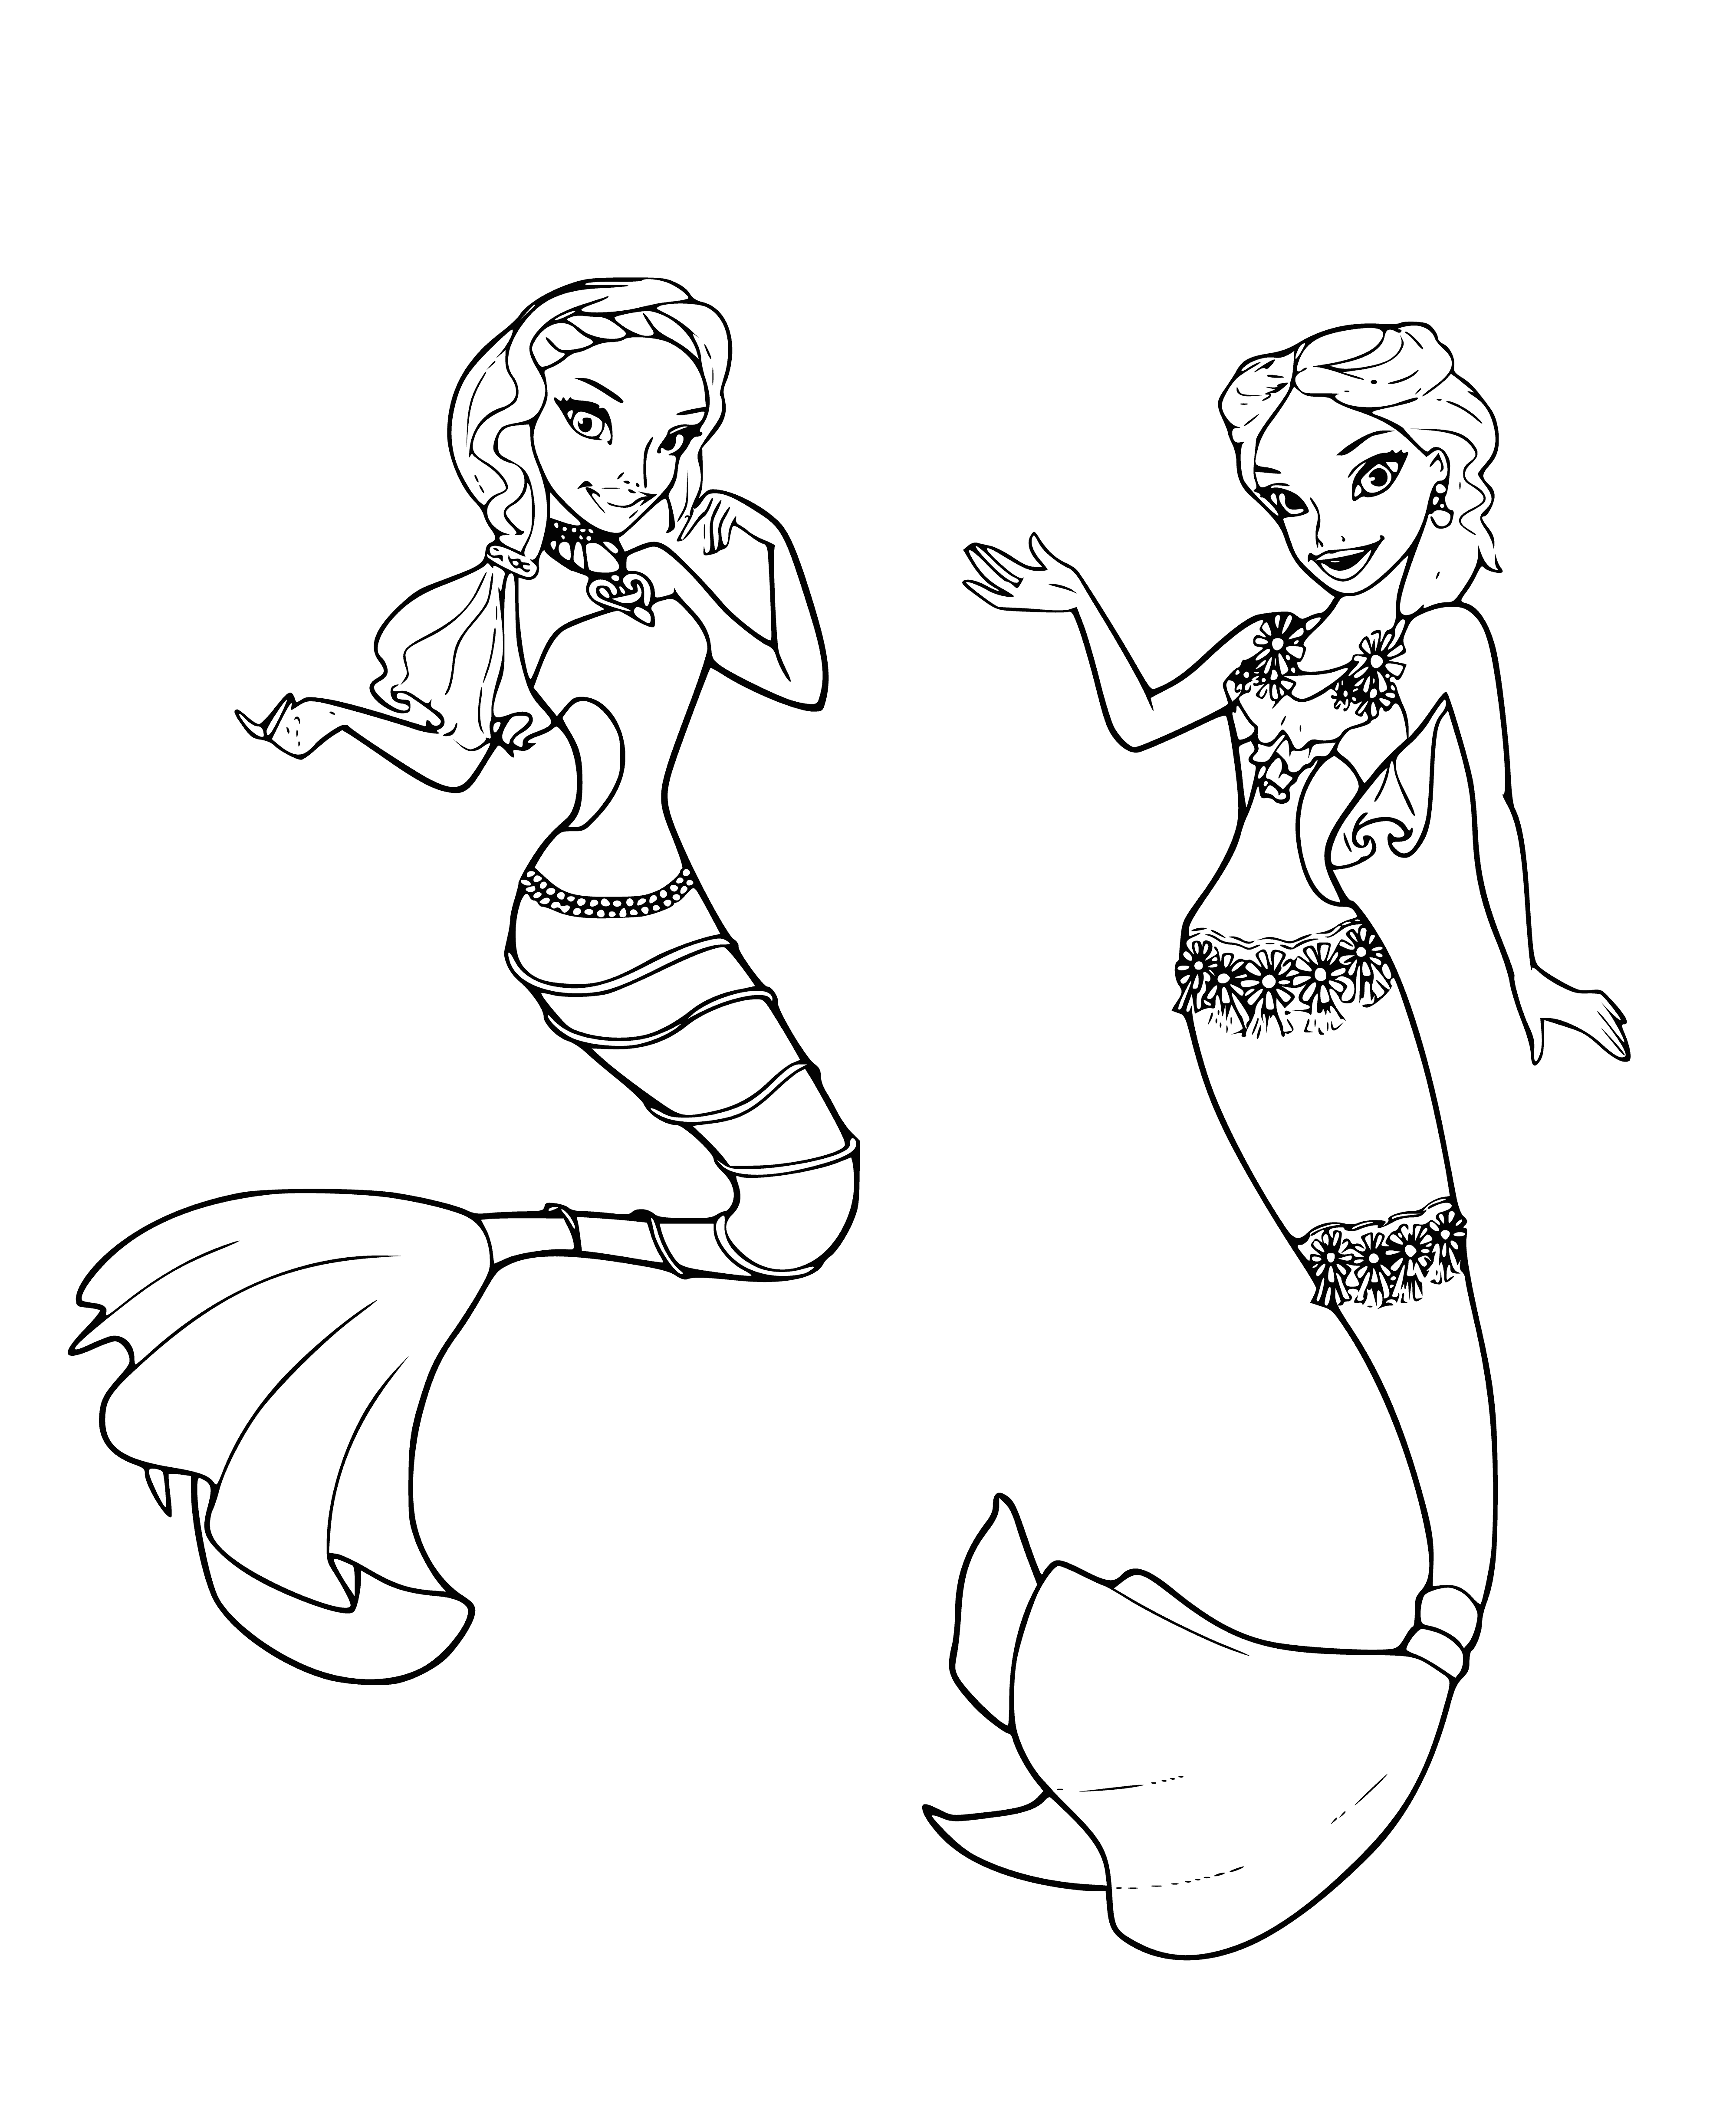 coloring page: Three mermaids holding hands in circle: blue, green and purple tails, wearing jewelry and crowns. #mermaids #coloringpages